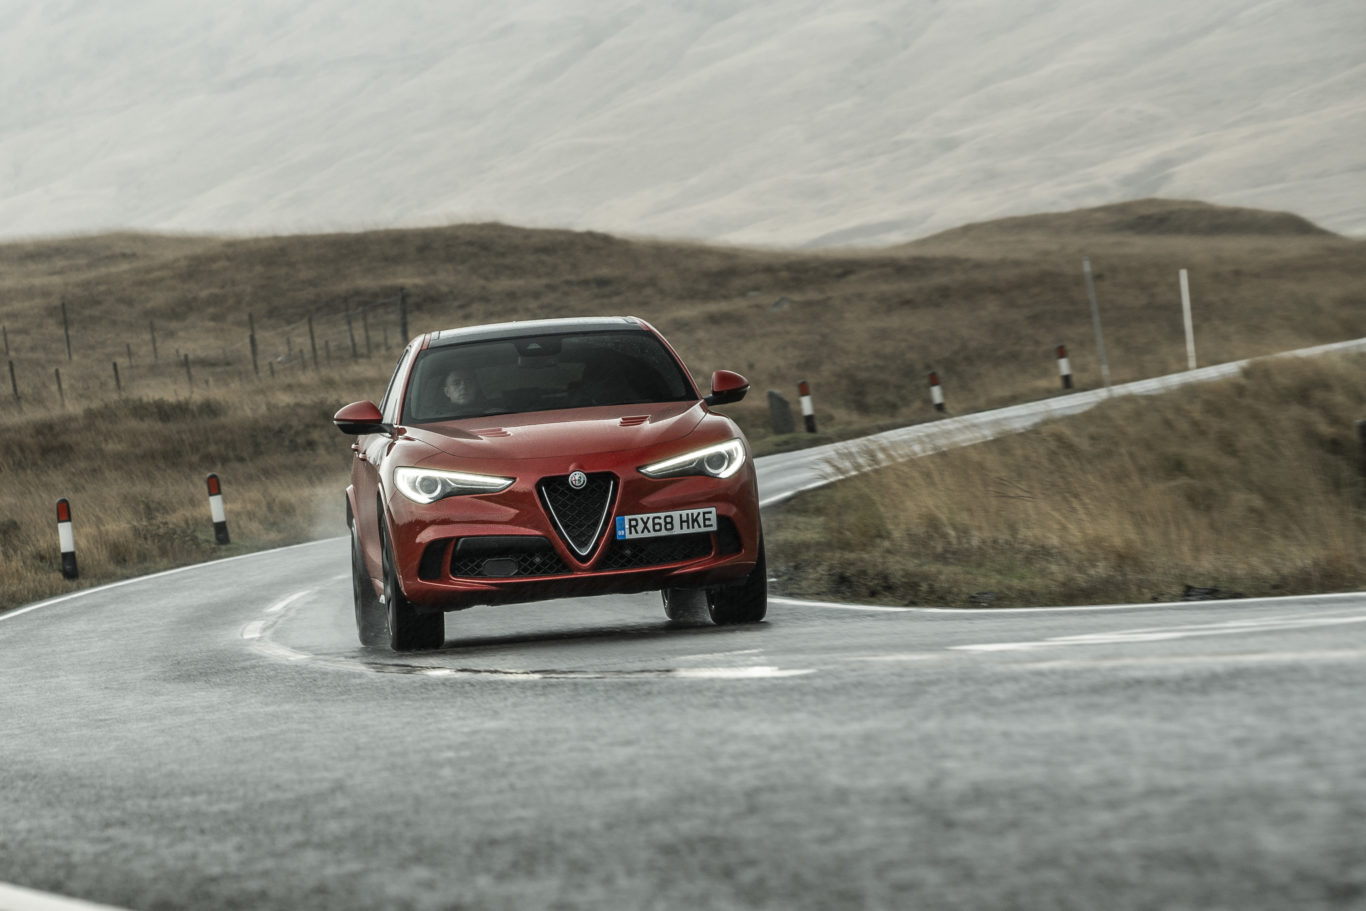 The Stelvio wears Alfa's iconic front grille